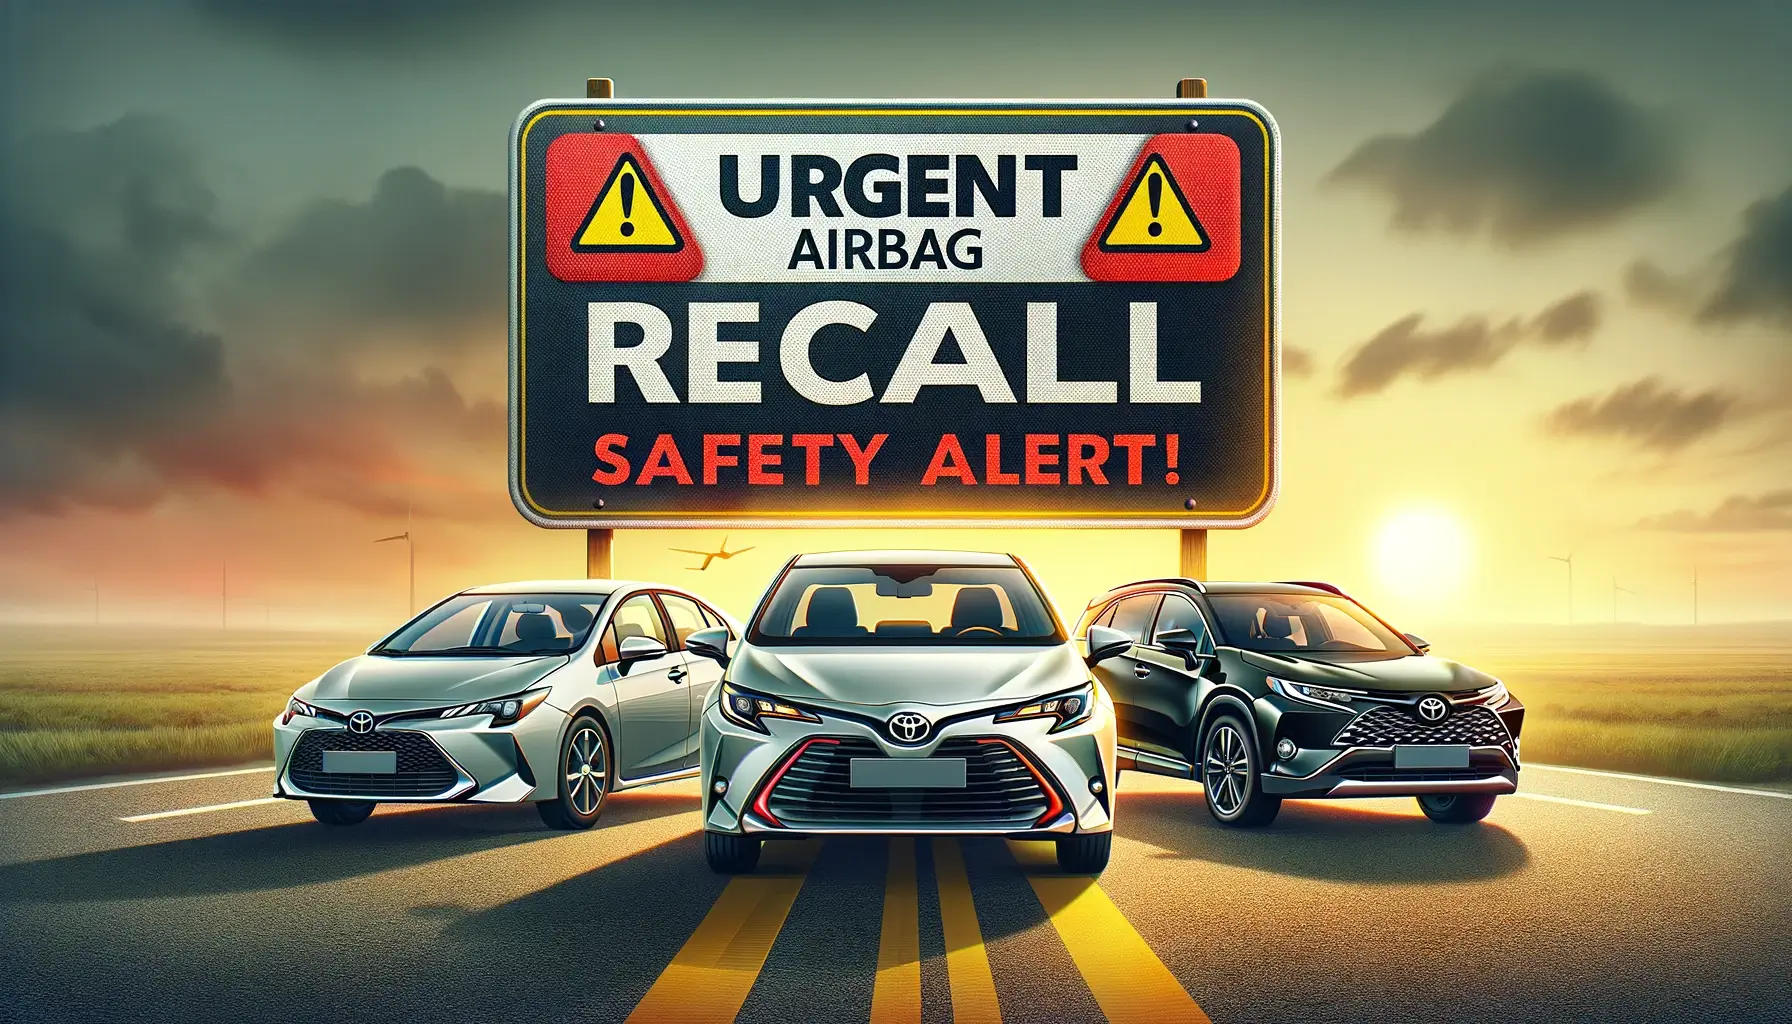 Banner featuring Toyota Corolla, Matrix, and RAV4 on a highway with an 'Urgent Airbag Recall Safety Alert' sign against a sunrise backdrop, indicating immediate action required for vehicle owners.